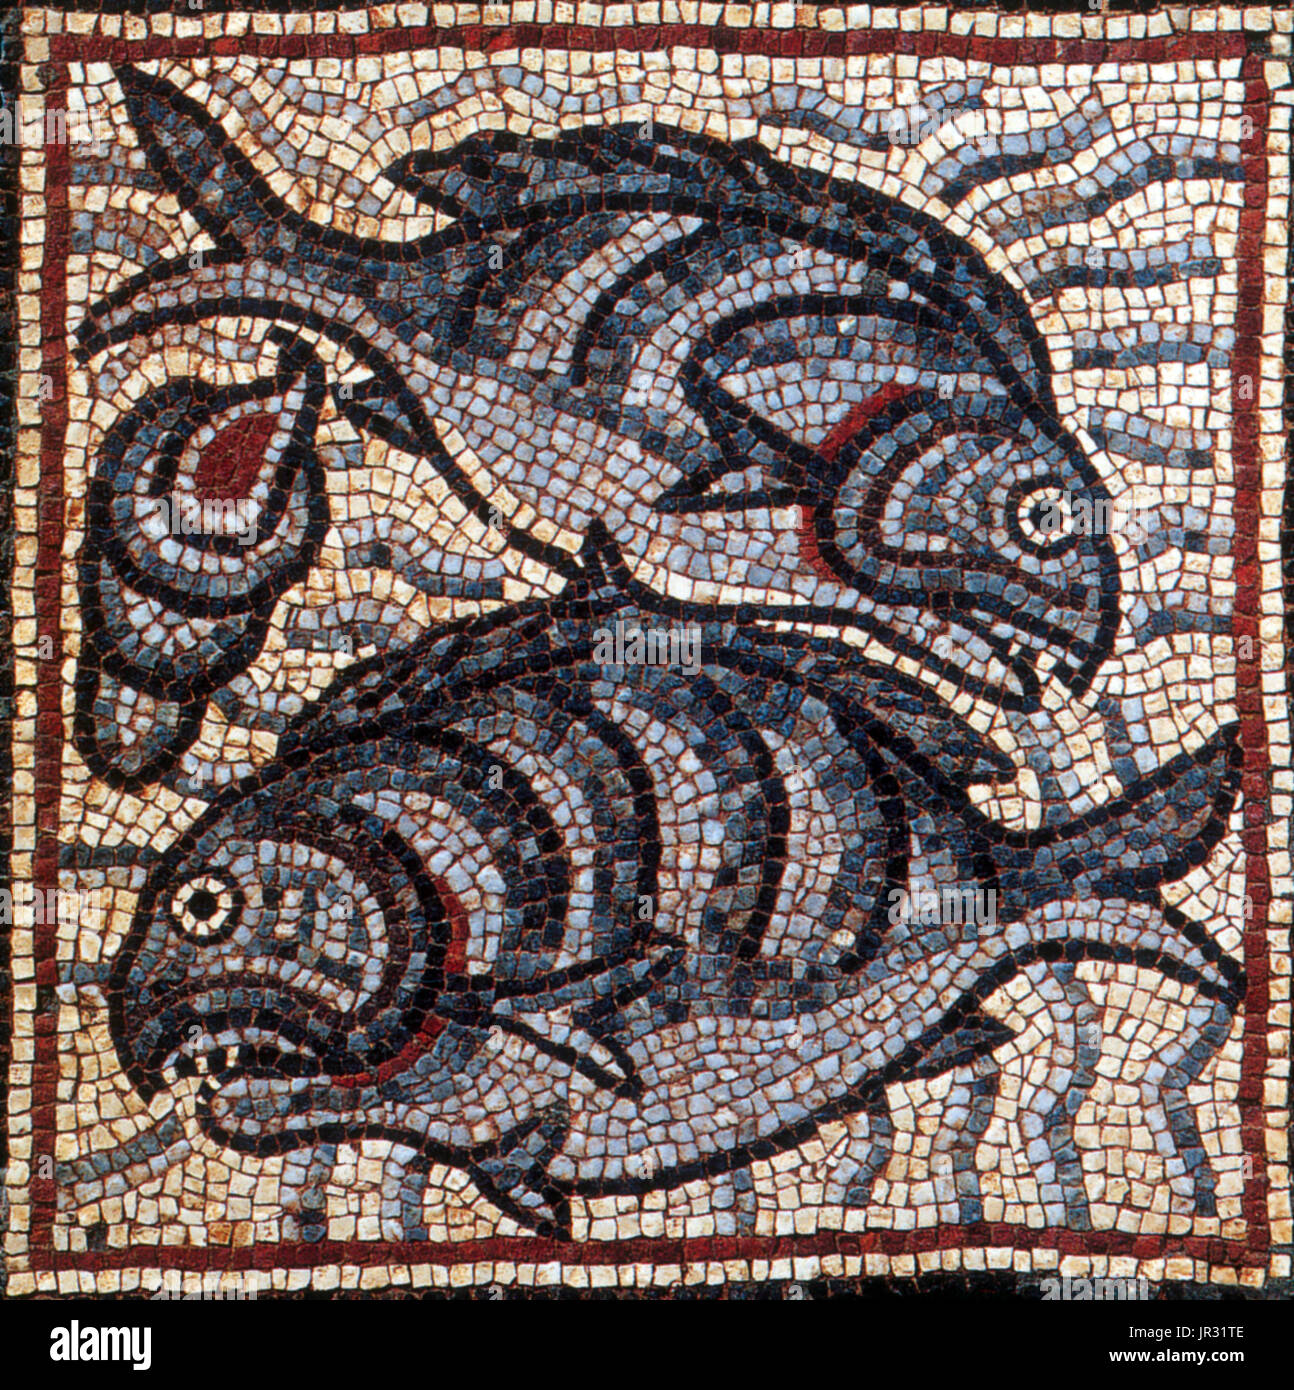 Byzantine Mosaic, Fish. Theodorias (modern Qasr Libya) was a Byzantine city in the Cyrenaica, founded in 539 by the emperor Justinian and named in honor of his wife, the Empress Theodora. The history of Qasr Libya goes back to the Greek period (4th century BC), when it was called Olbia. The complex contained two churches: the eastern church, discovered in 1957, and the western church, discovered in 1964. The mosaics were excavated from the nearby eastern church after they were discovered by Libyan laborers. The collection contains 50 panels, mostly of animals, gods, goddesses, nymphs, and famo Stock Photo